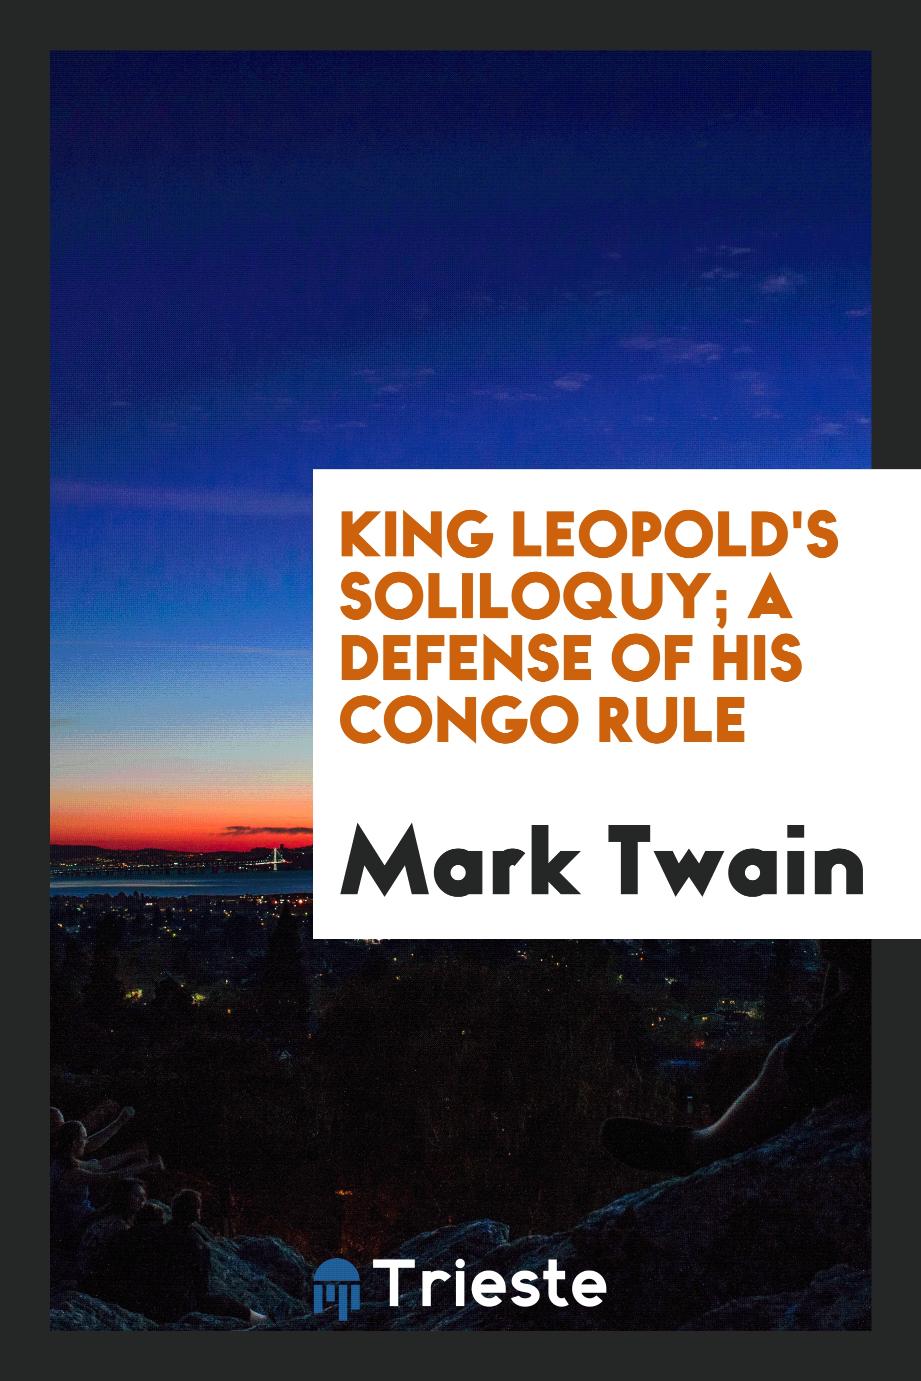 King Leopold's soliloquy; a defense of his Congo rule